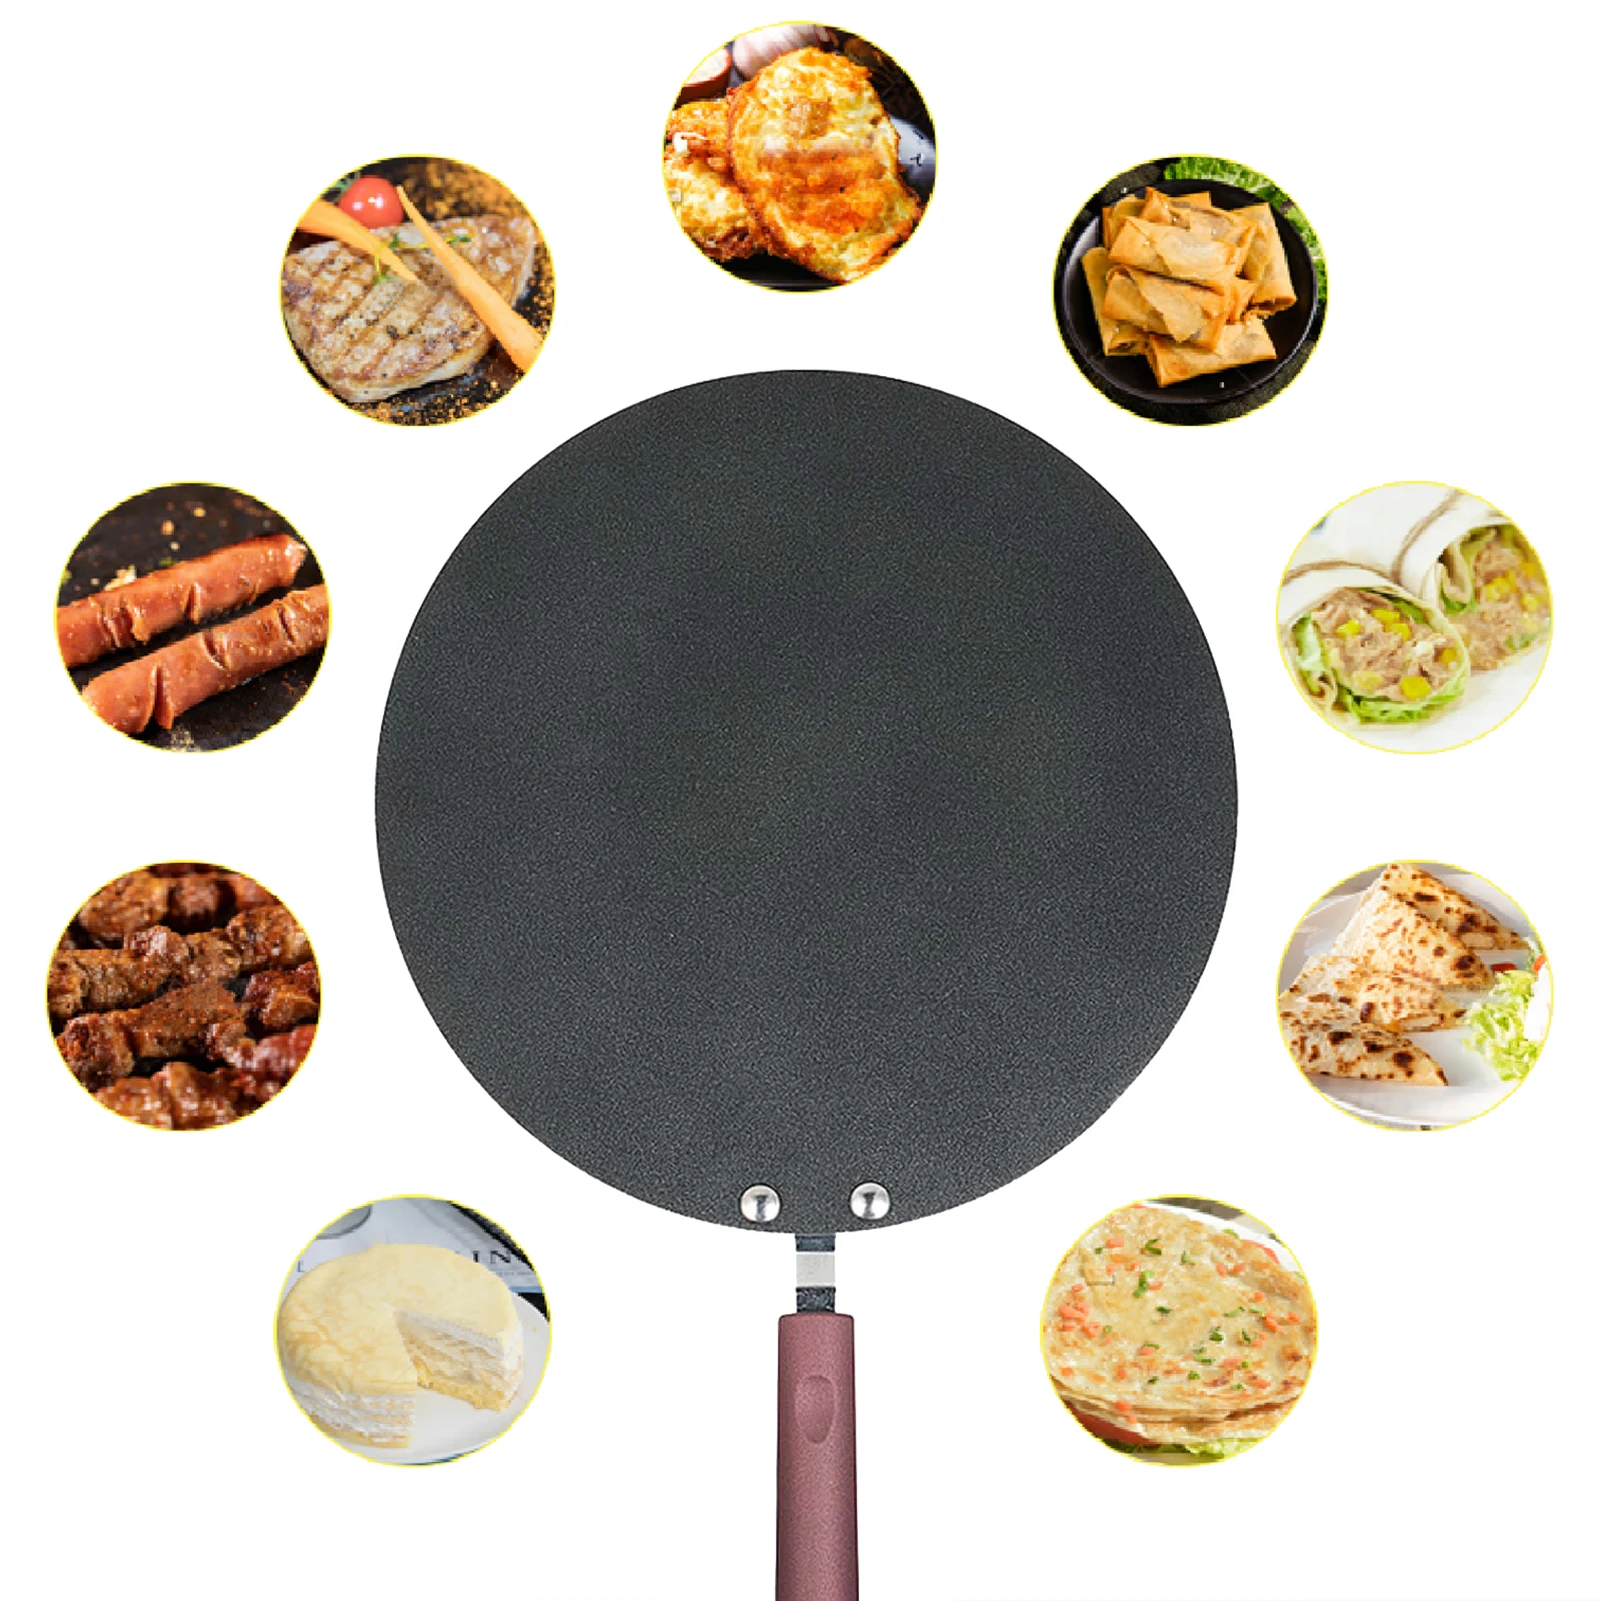 Iron Frying Pan Flat Pancake Griddle Non-stick Cookware for Kitchen Pancake Egg Omelette Frying Gas Cooker Durable Saucepan